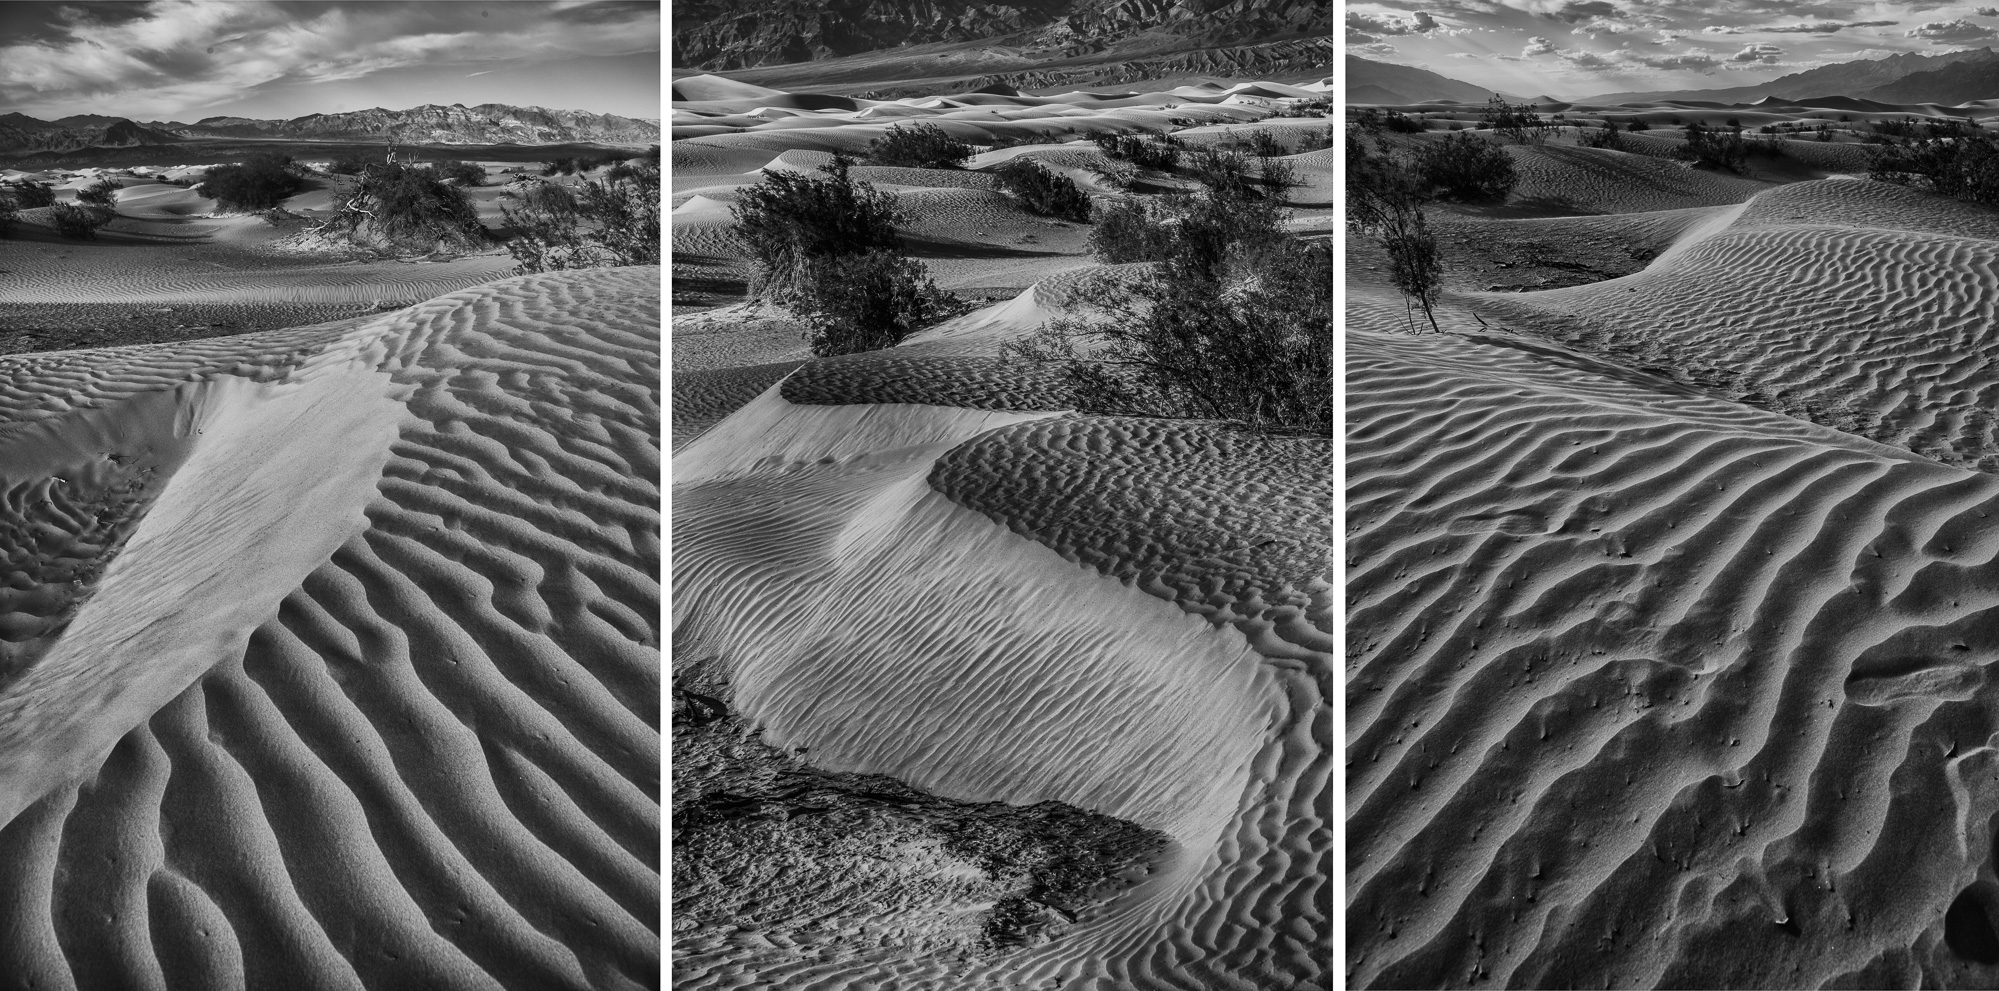 Stovepipe Wells. Mesquite Flat Sand Dunes.